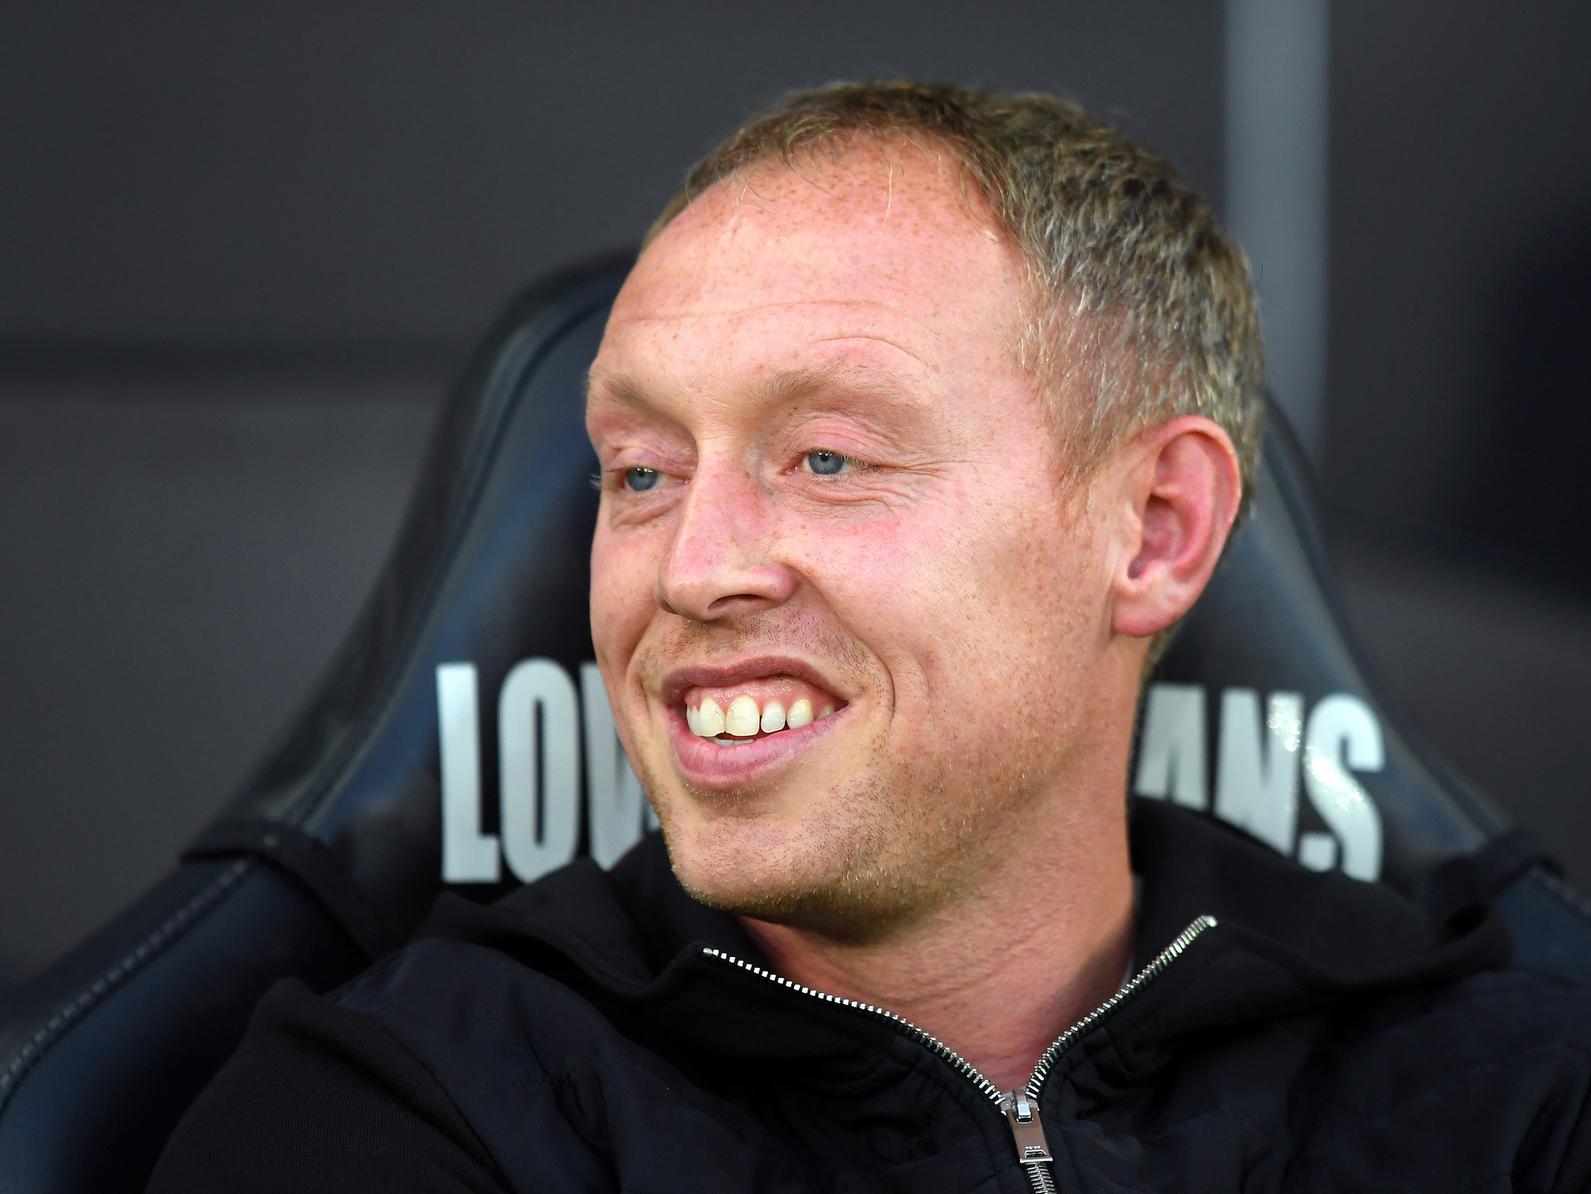 Swansea City manager Steve Cooper has showered Charlton Athletic boss Lee Bowyer with praise ahead of their match on Tuesday evening, and has urged his side to head into the game with the right mentality. (Wales Online)